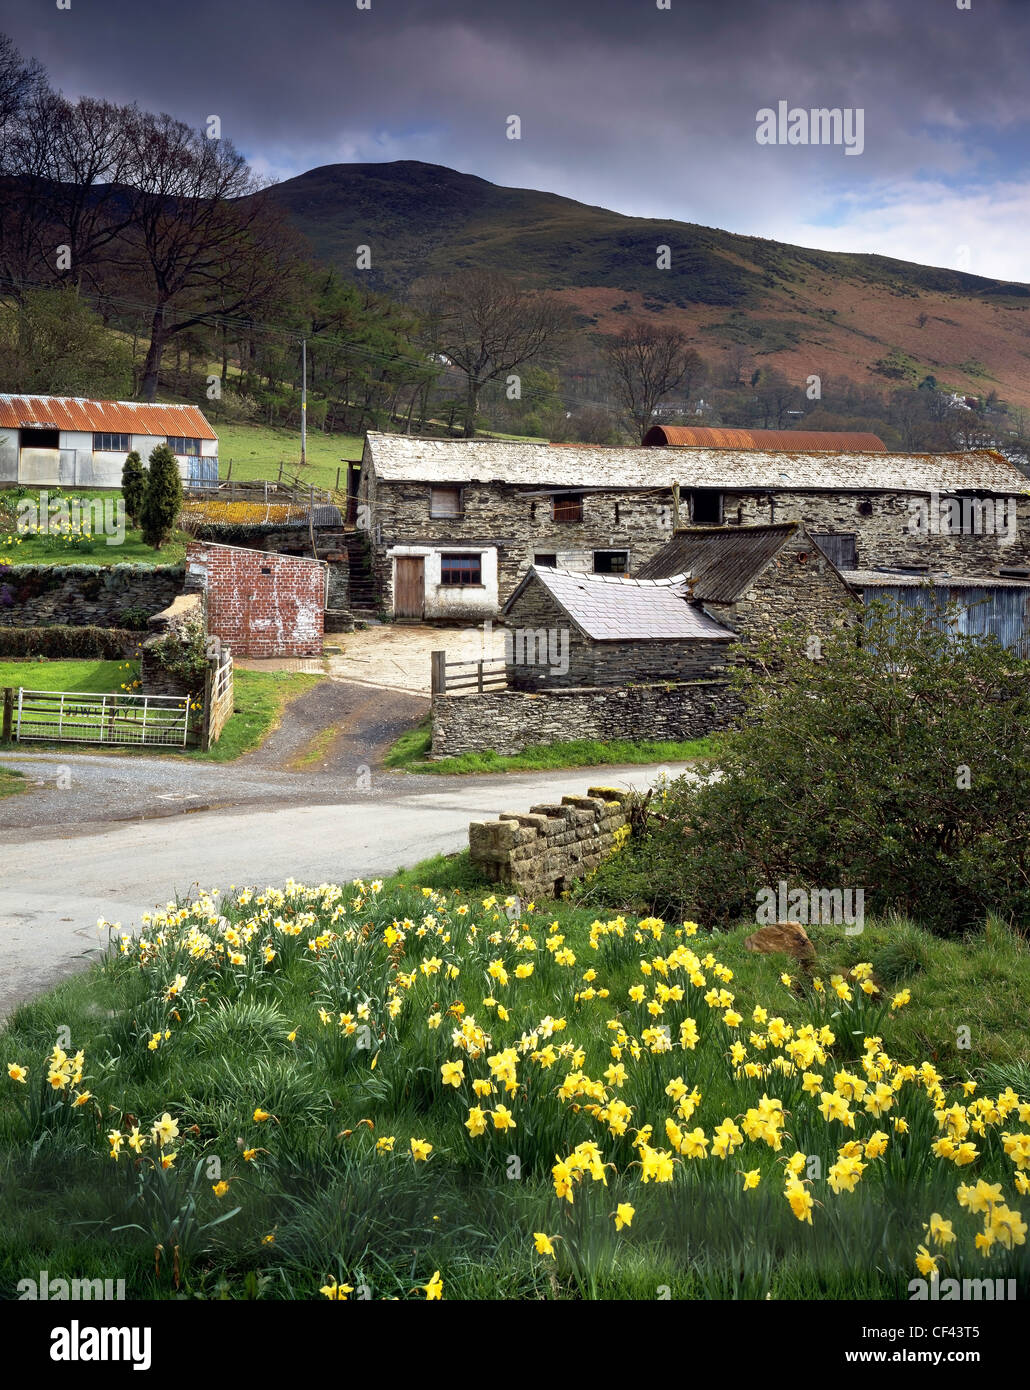 Daffodils bloom by the side of a small country lane and old farm buildings in a remote valley in North Wales. Stock Photo